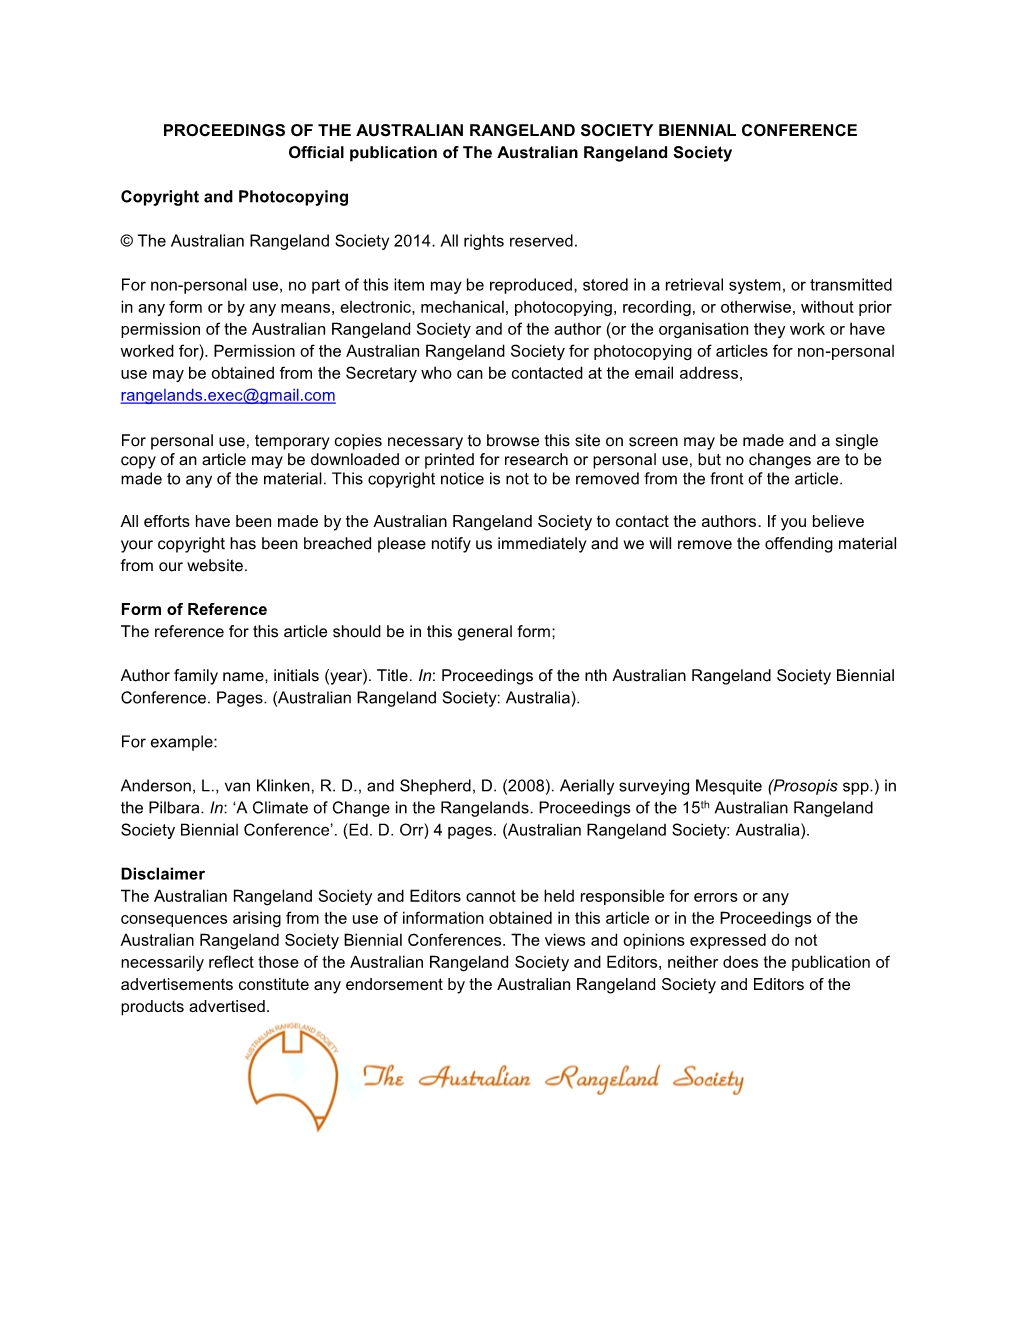 PROCEEDINGS of the AUSTRALIAN RANGELAND SOCIETY BIENNIAL CONFERENCE Official Publication of the Australian Rangeland Society